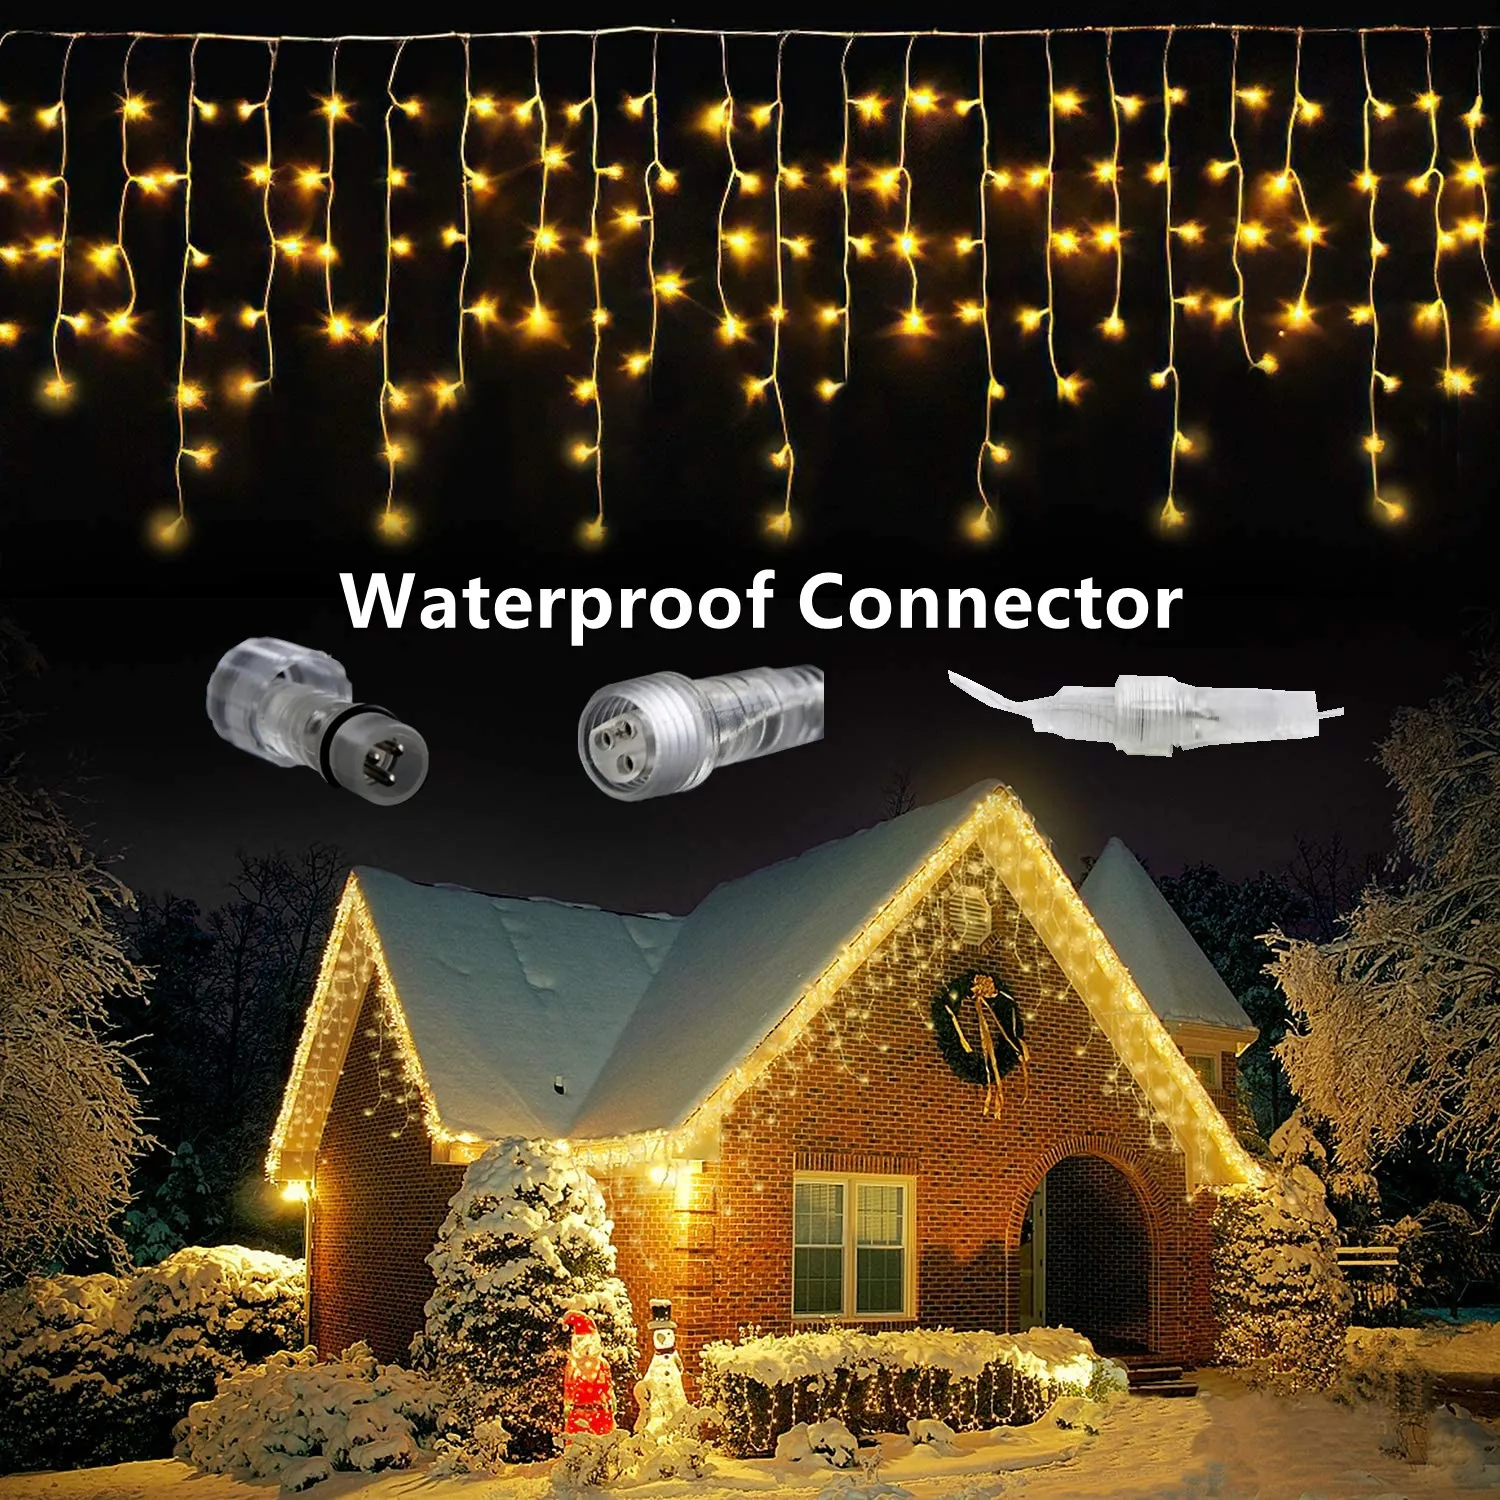 

Street Garland On The House Christmas Decorations Ornaments LED Festoon Icicle Curtain Light Droop 0.5/0.6/0.7M EU Plug New Year